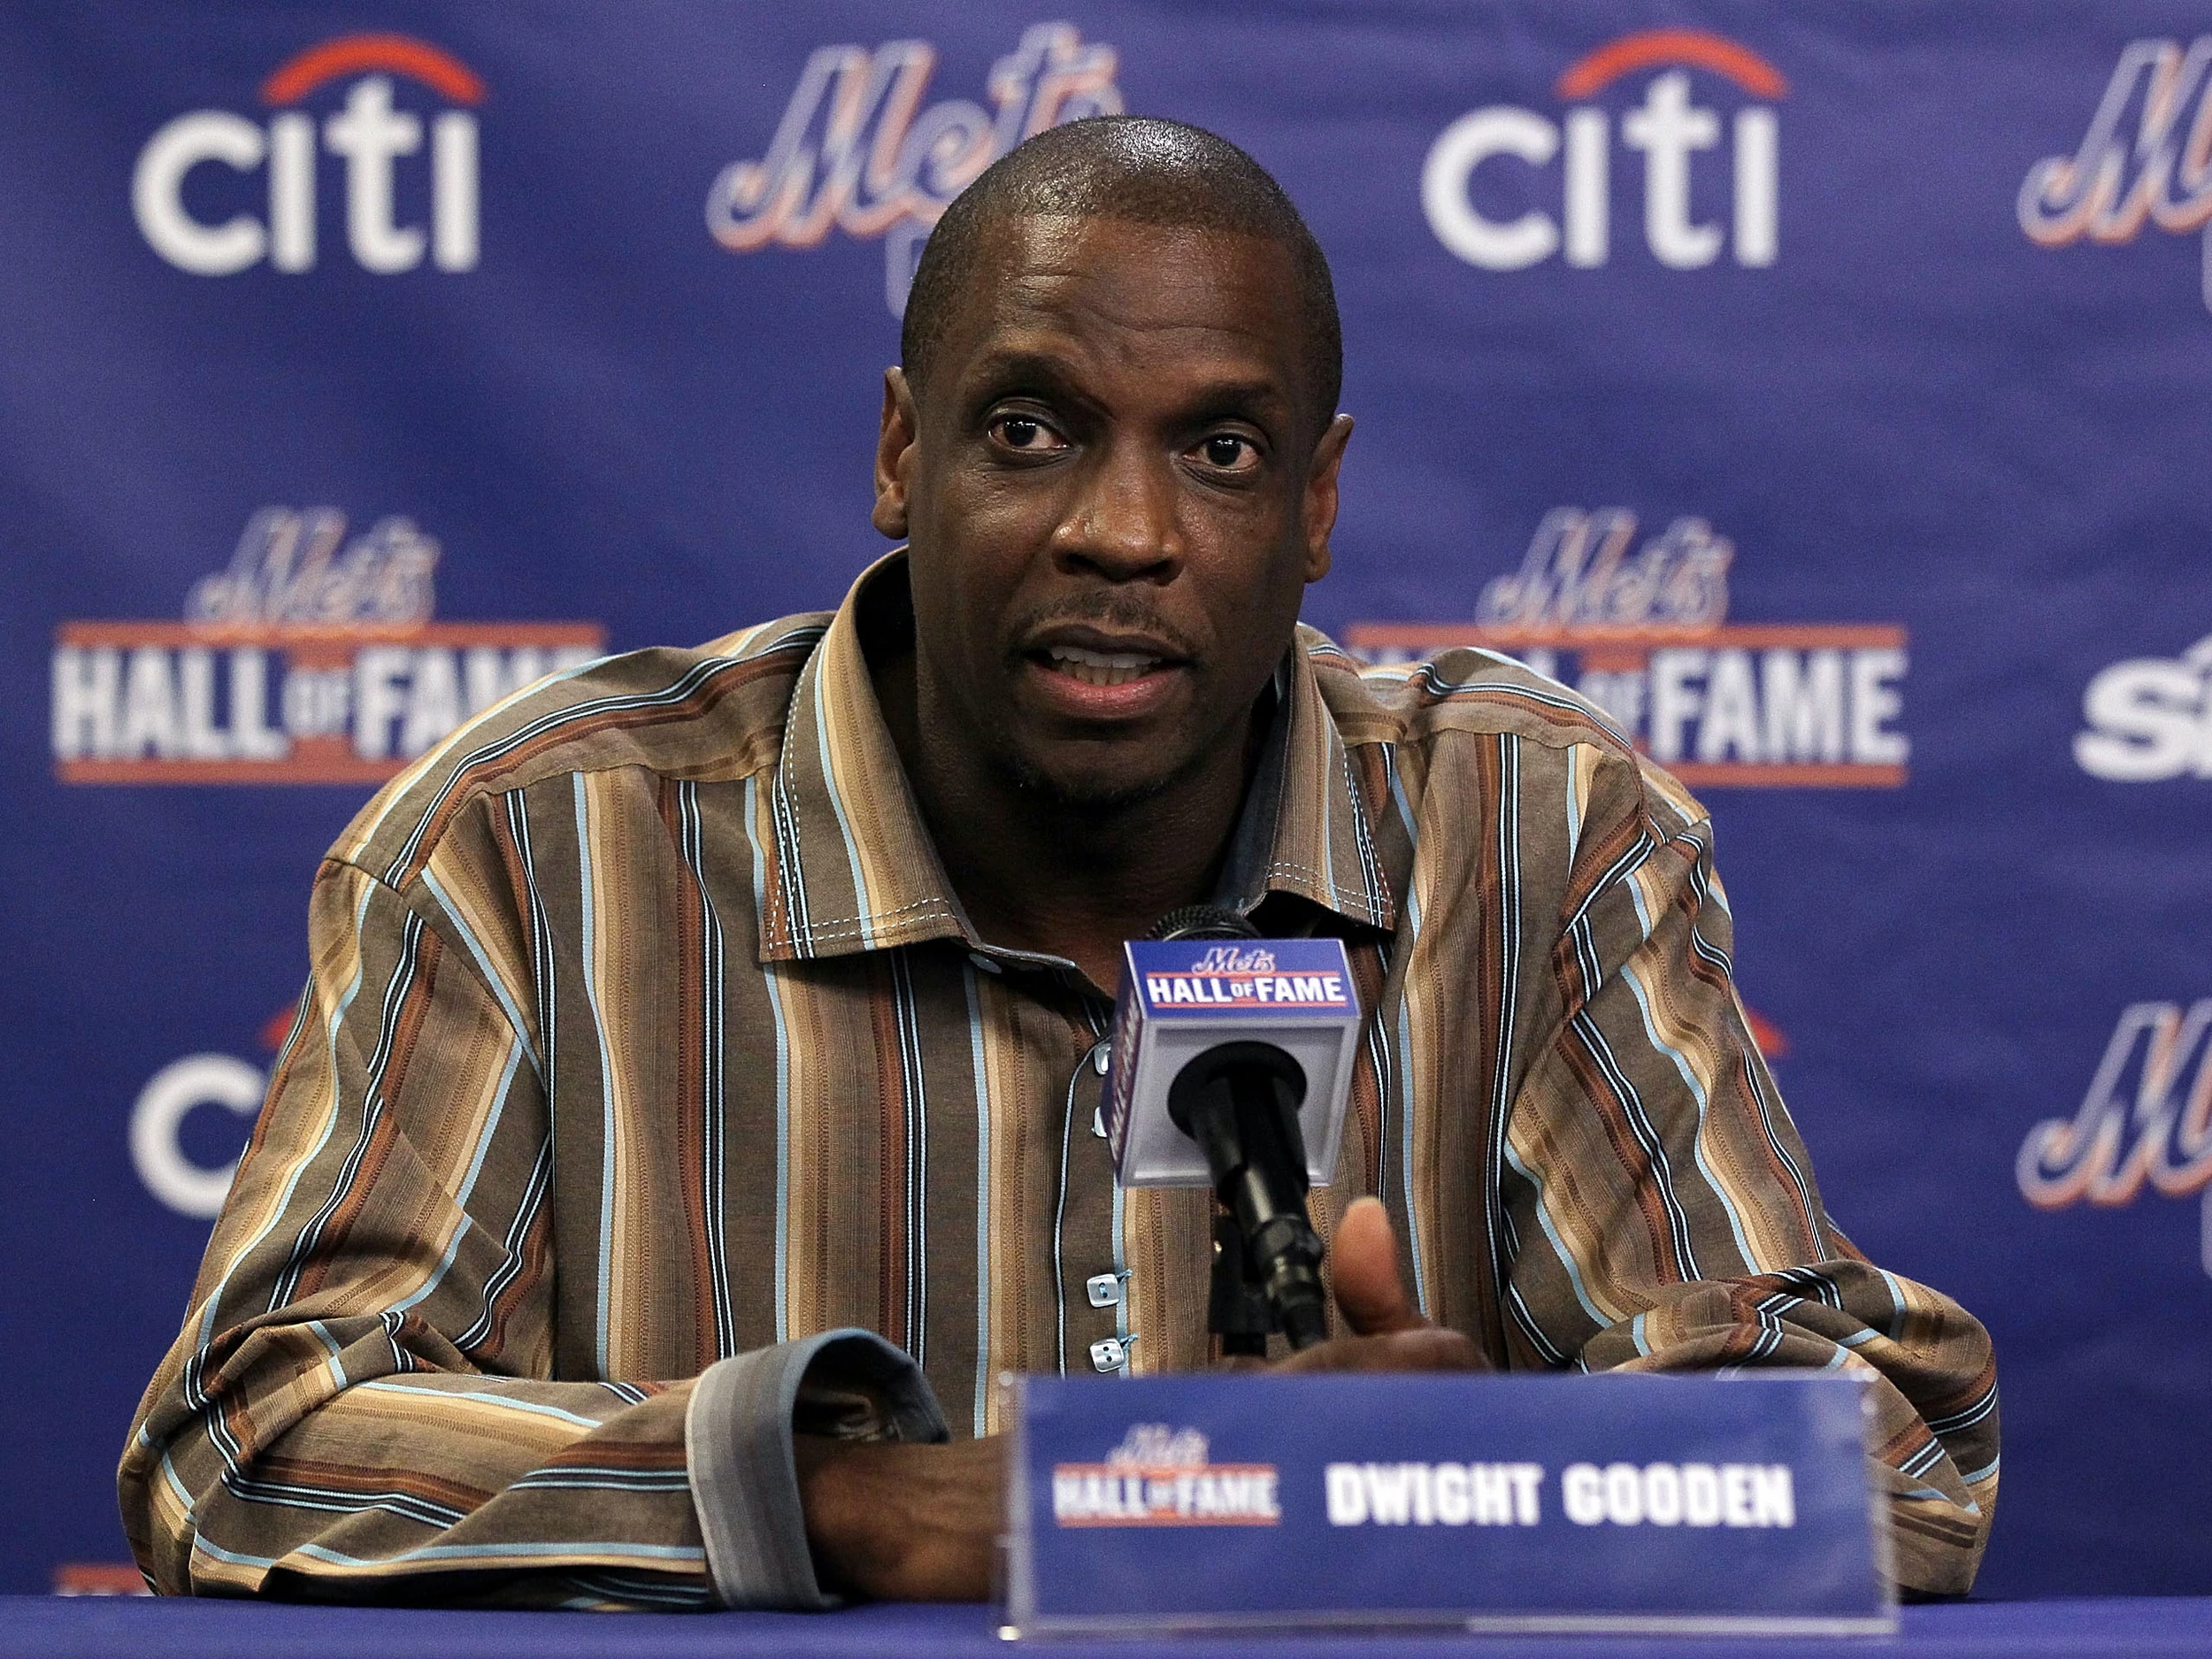 Dwight Gooden Skipped New York Mets' 1986 World Series Victory Parade to Do  Cocaine [VIDEO] - TSM Interactive